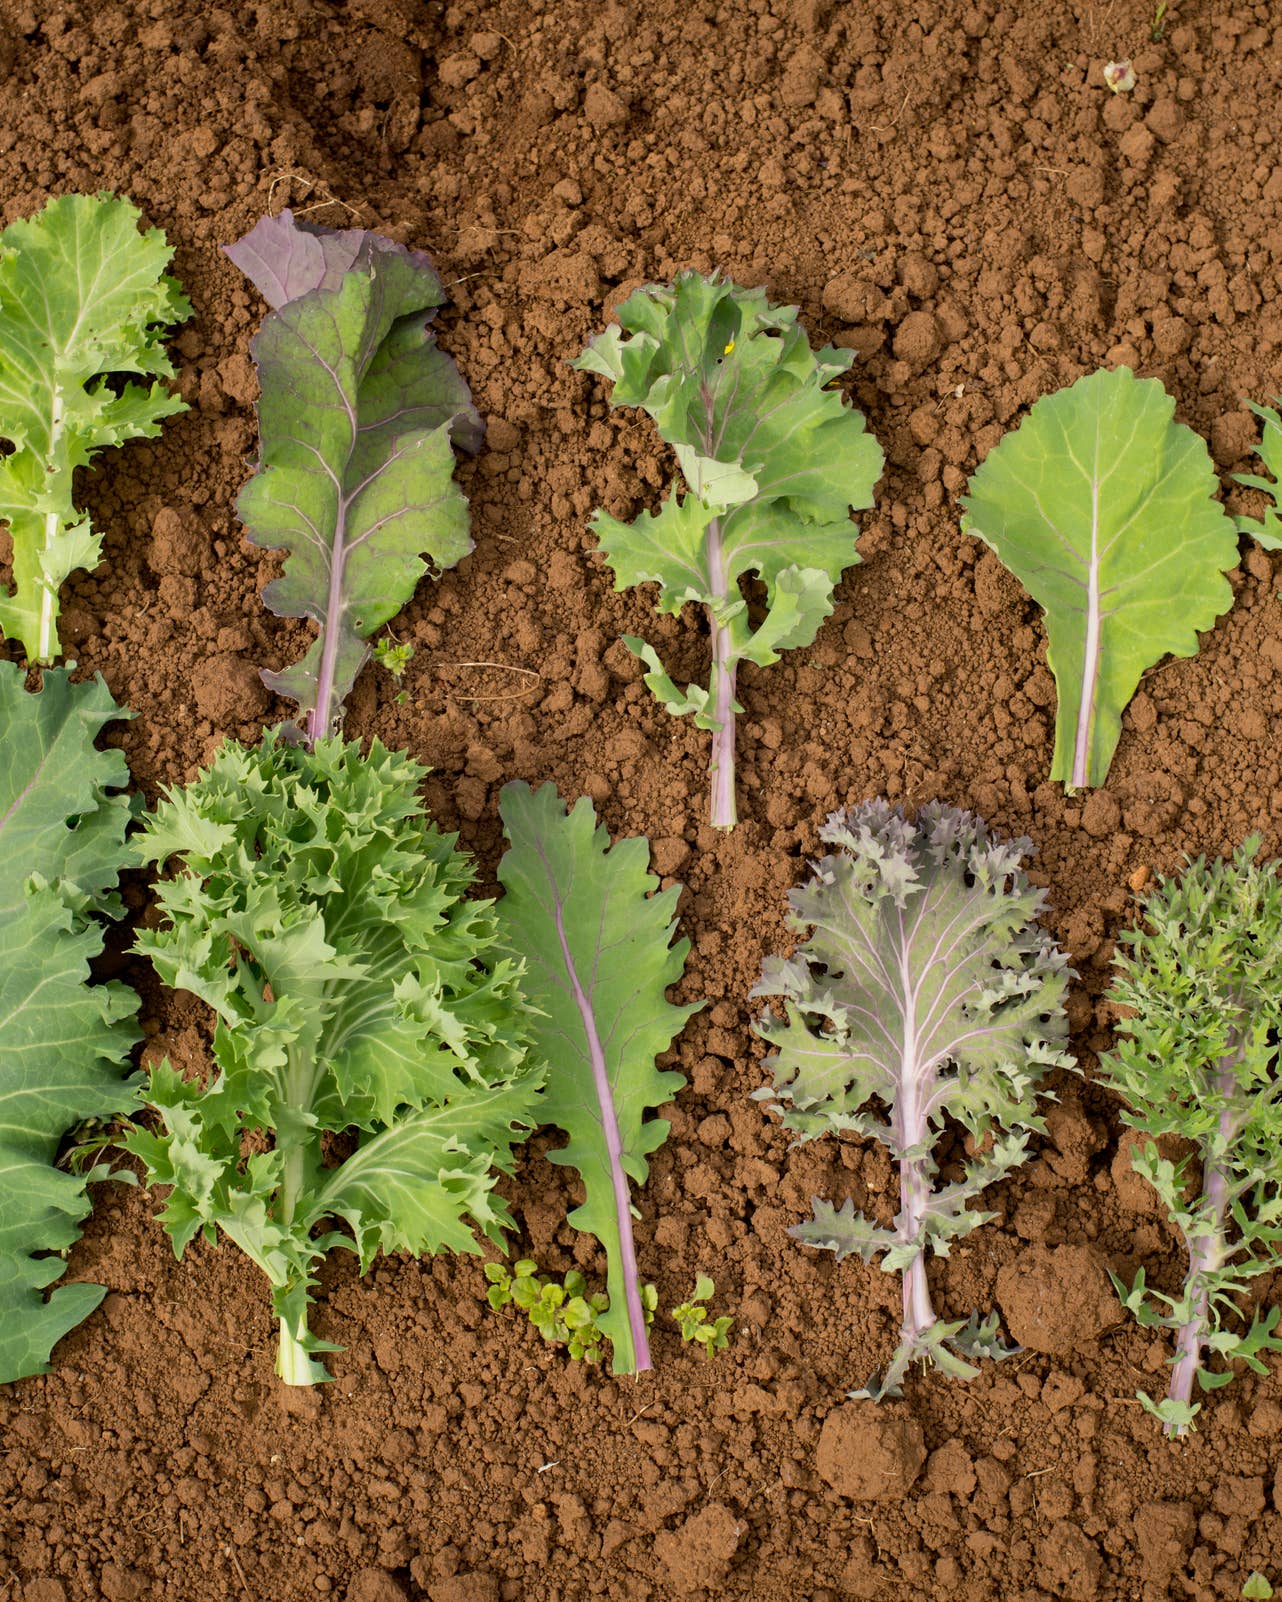 How to Grow Your Own Salad This Fall